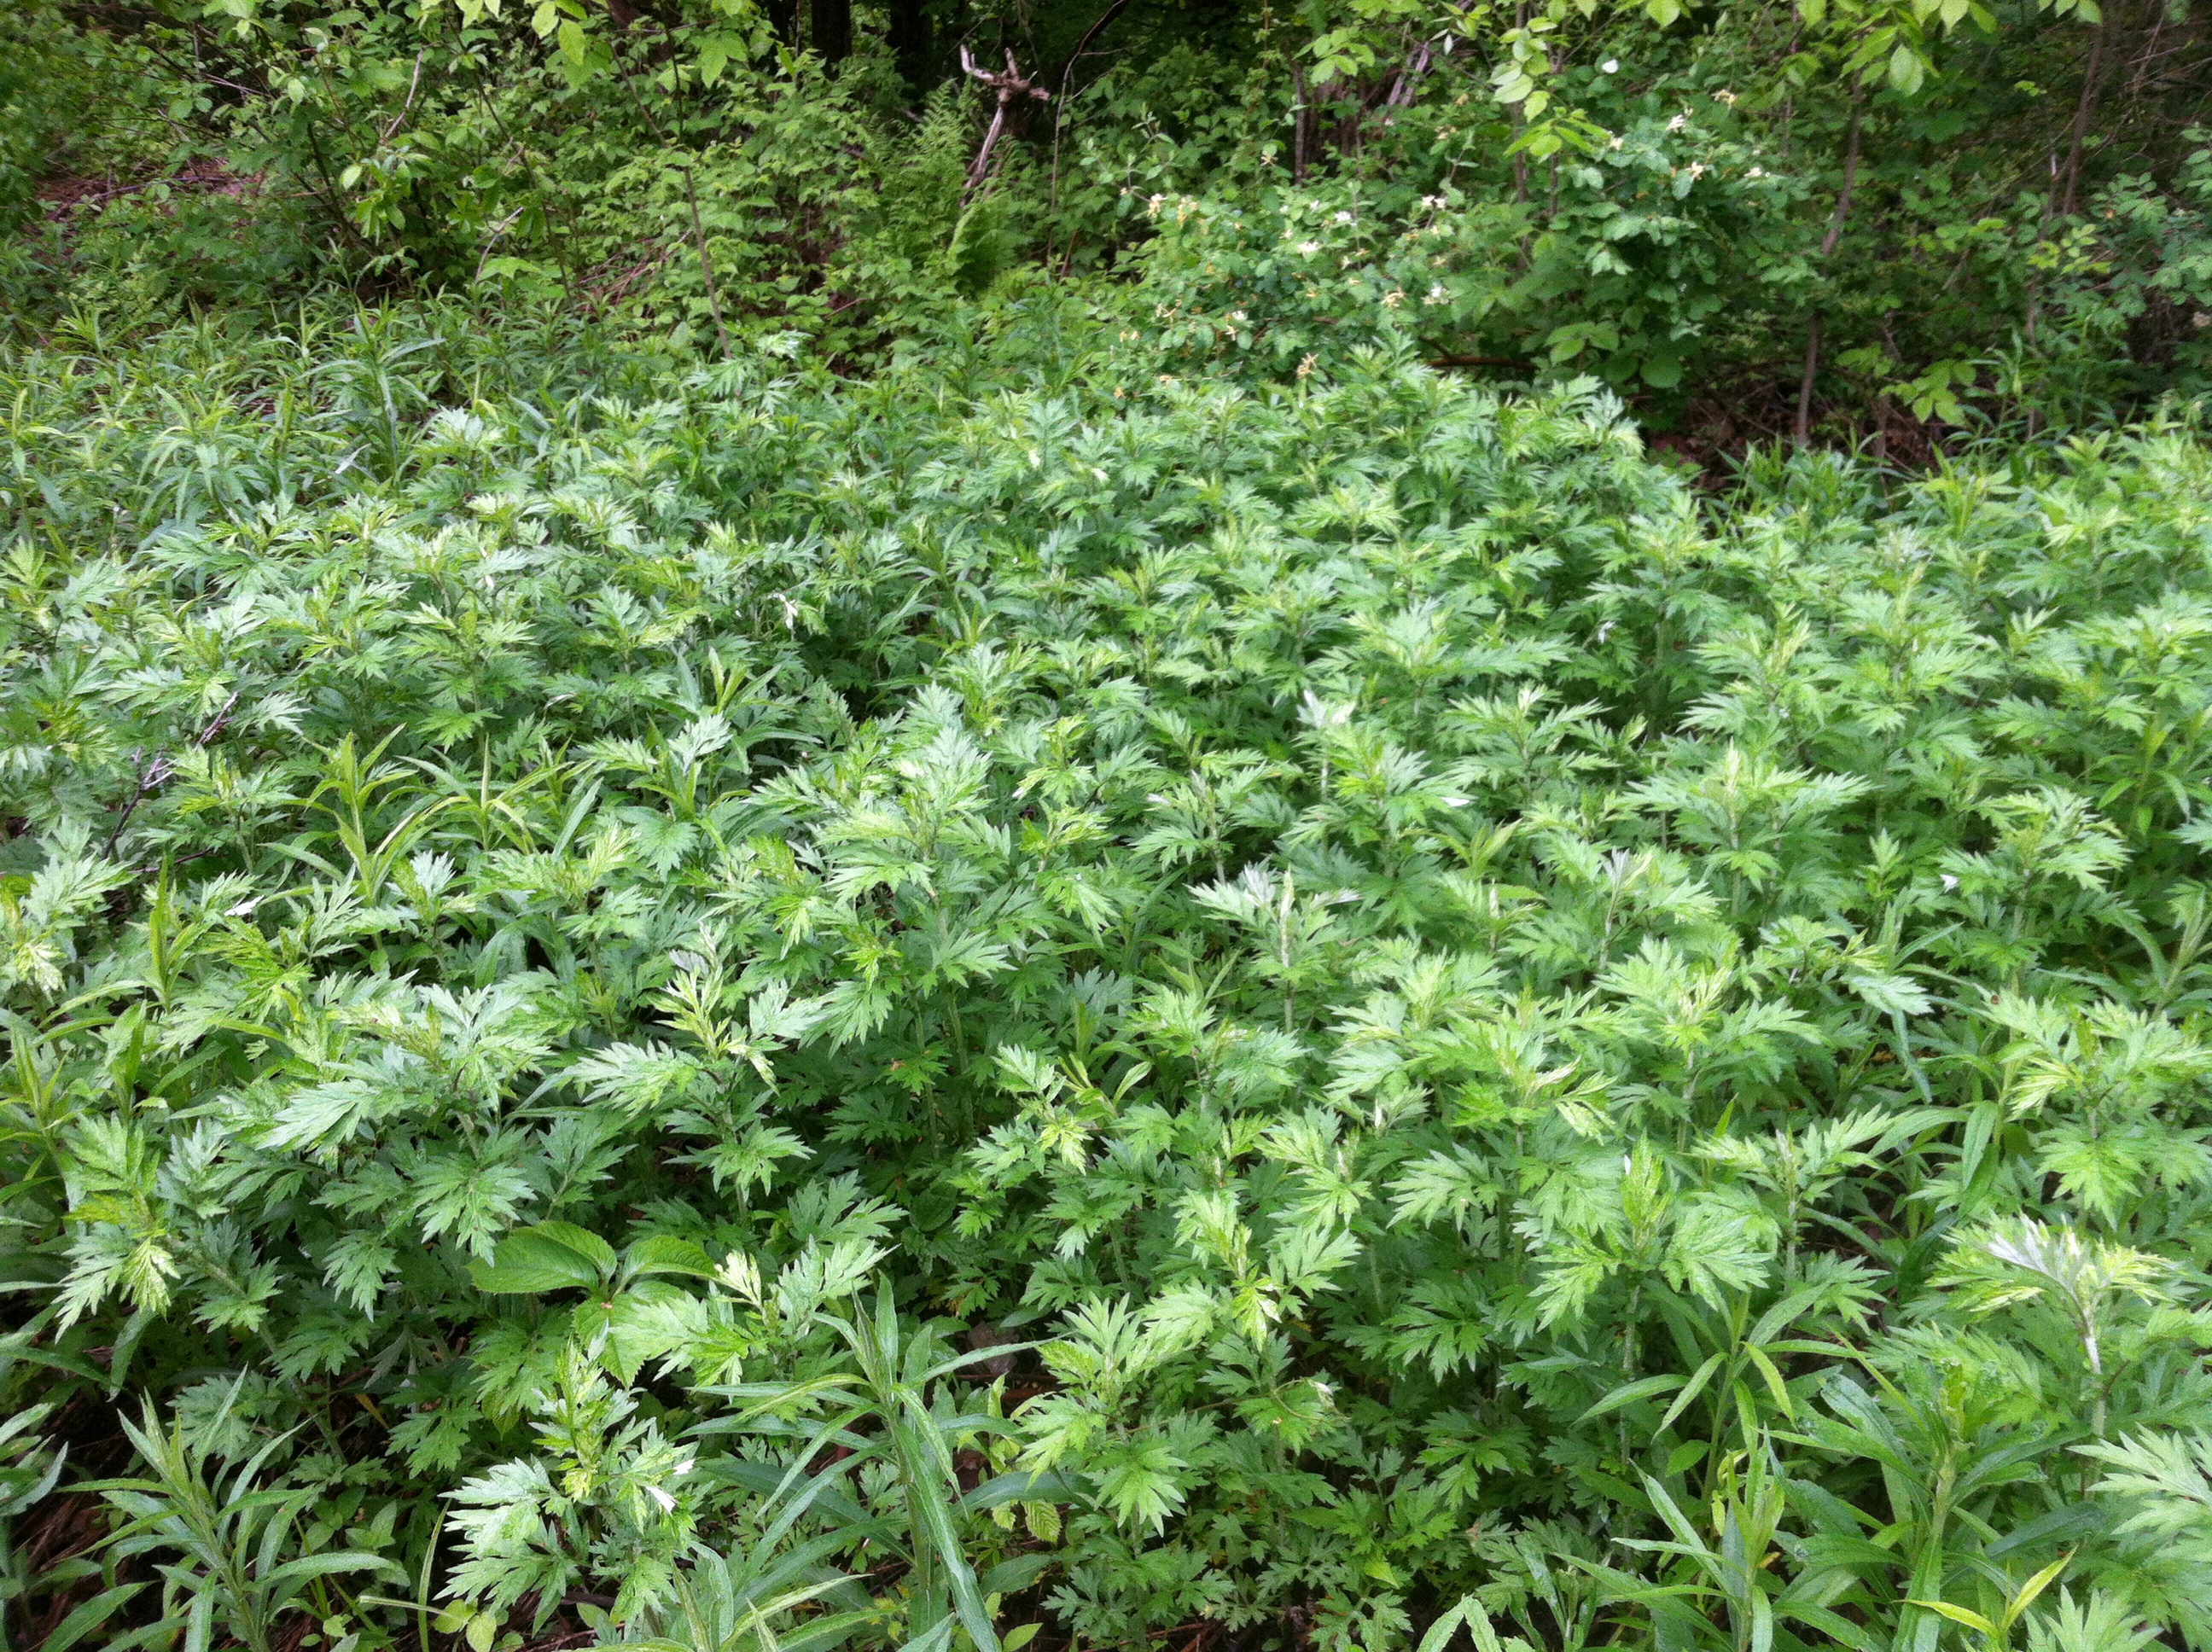 An image of mugwort, often used with wine and witchcraft to protect against sorcery.